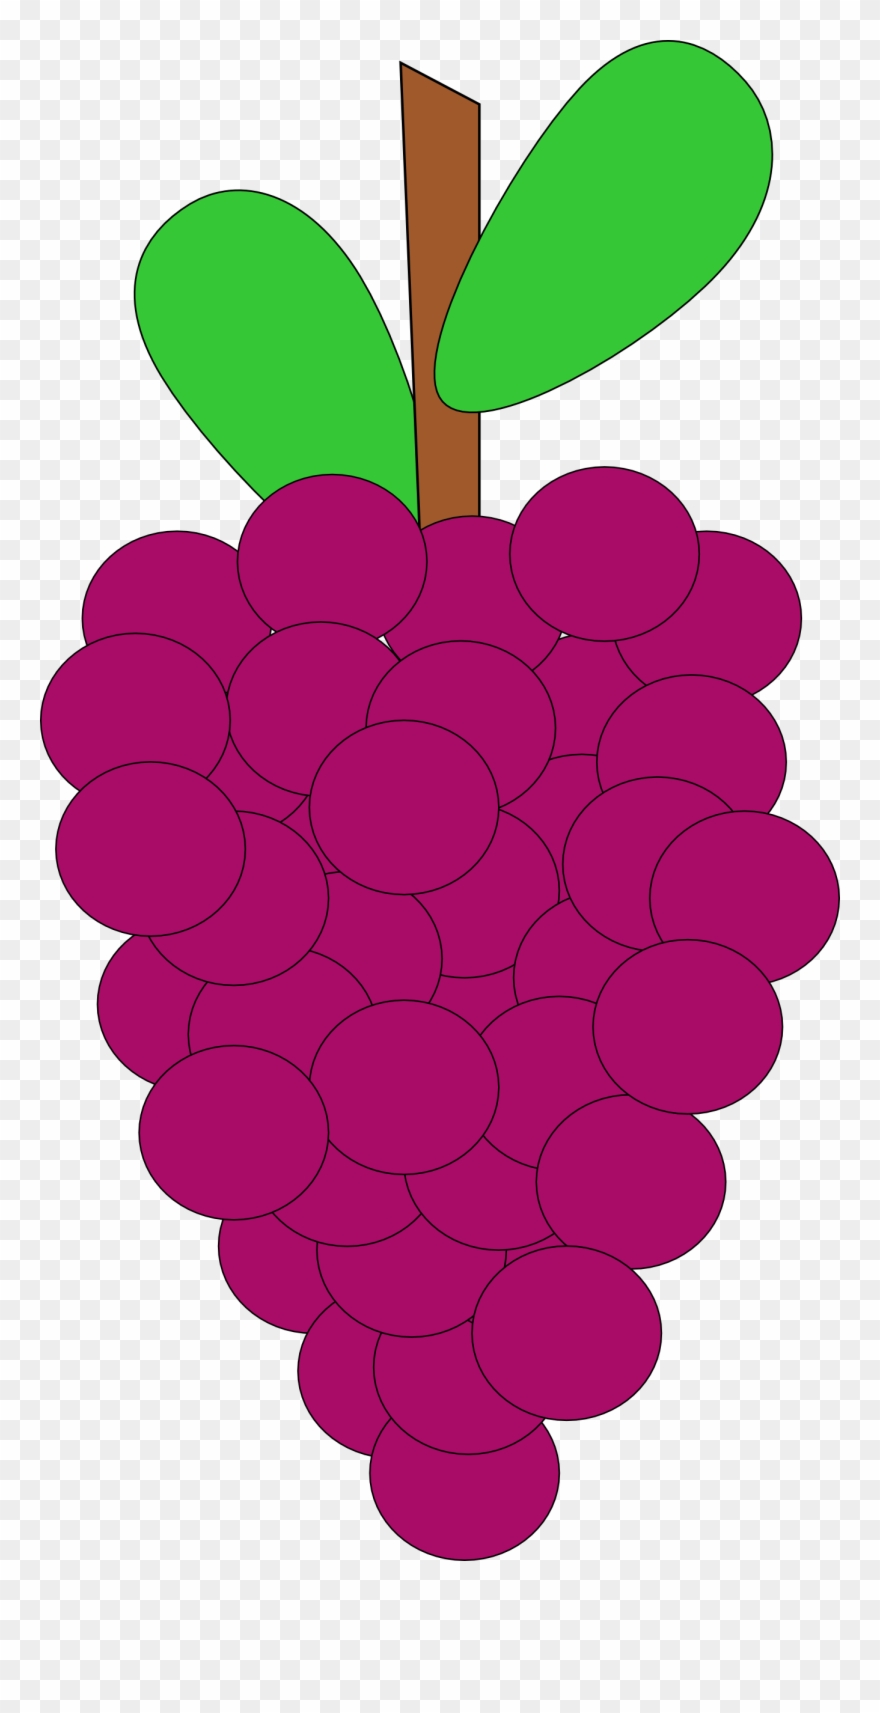 Grapes clipart purple thing. Animated picture of grape